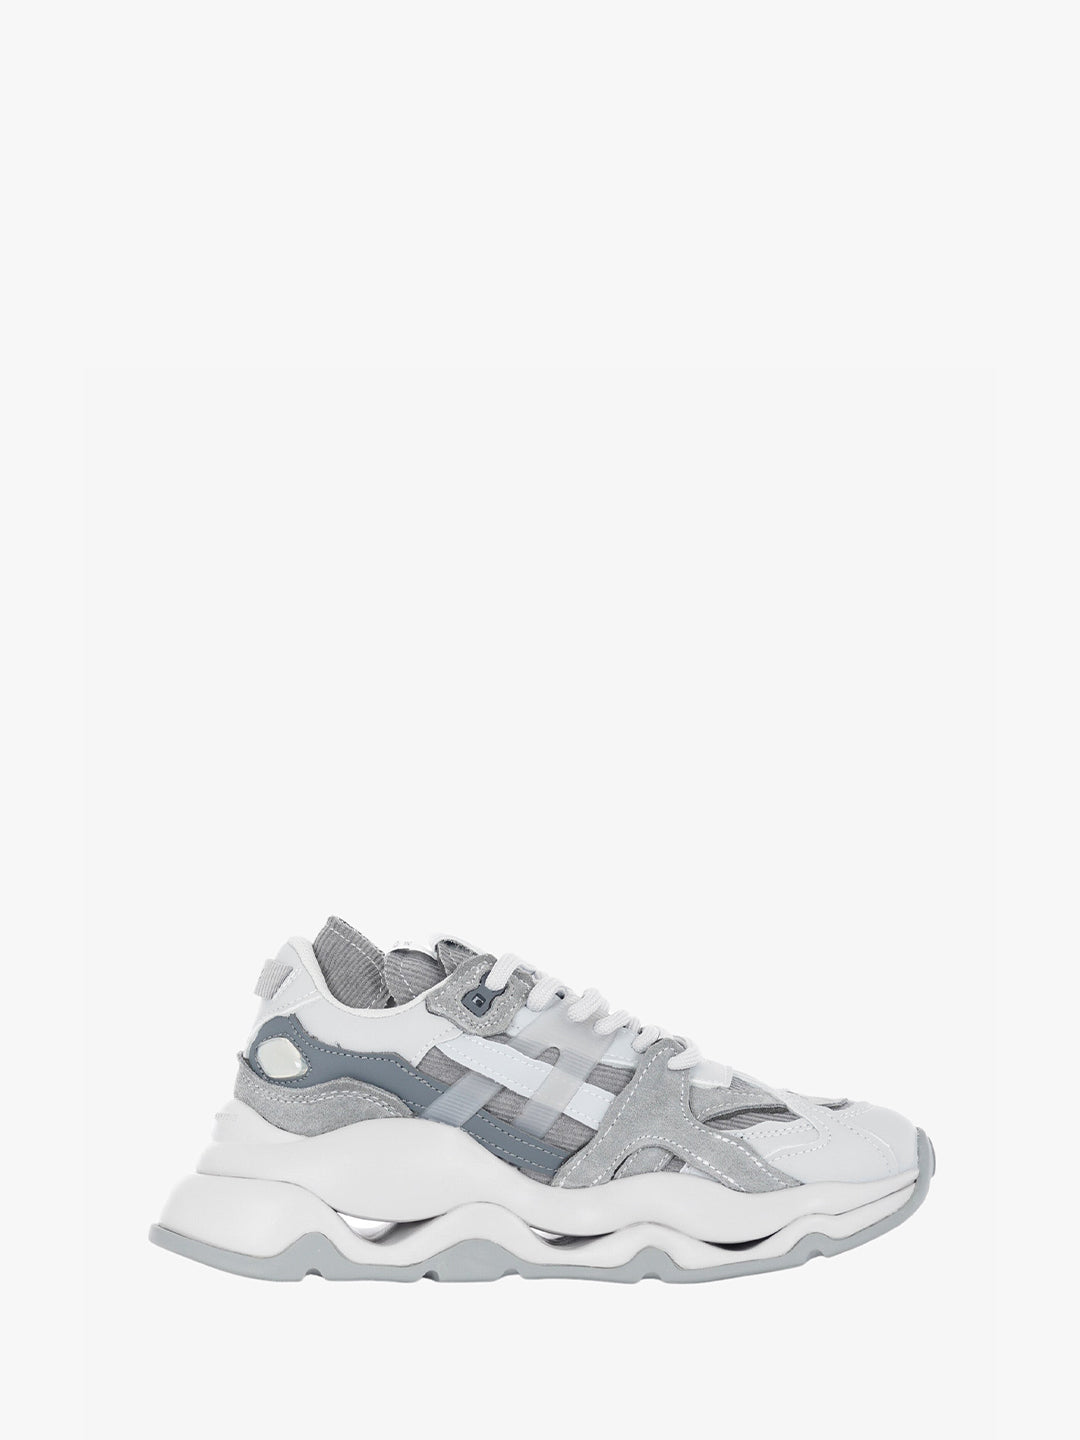 Acupuncture Acu Wave gray sneakers